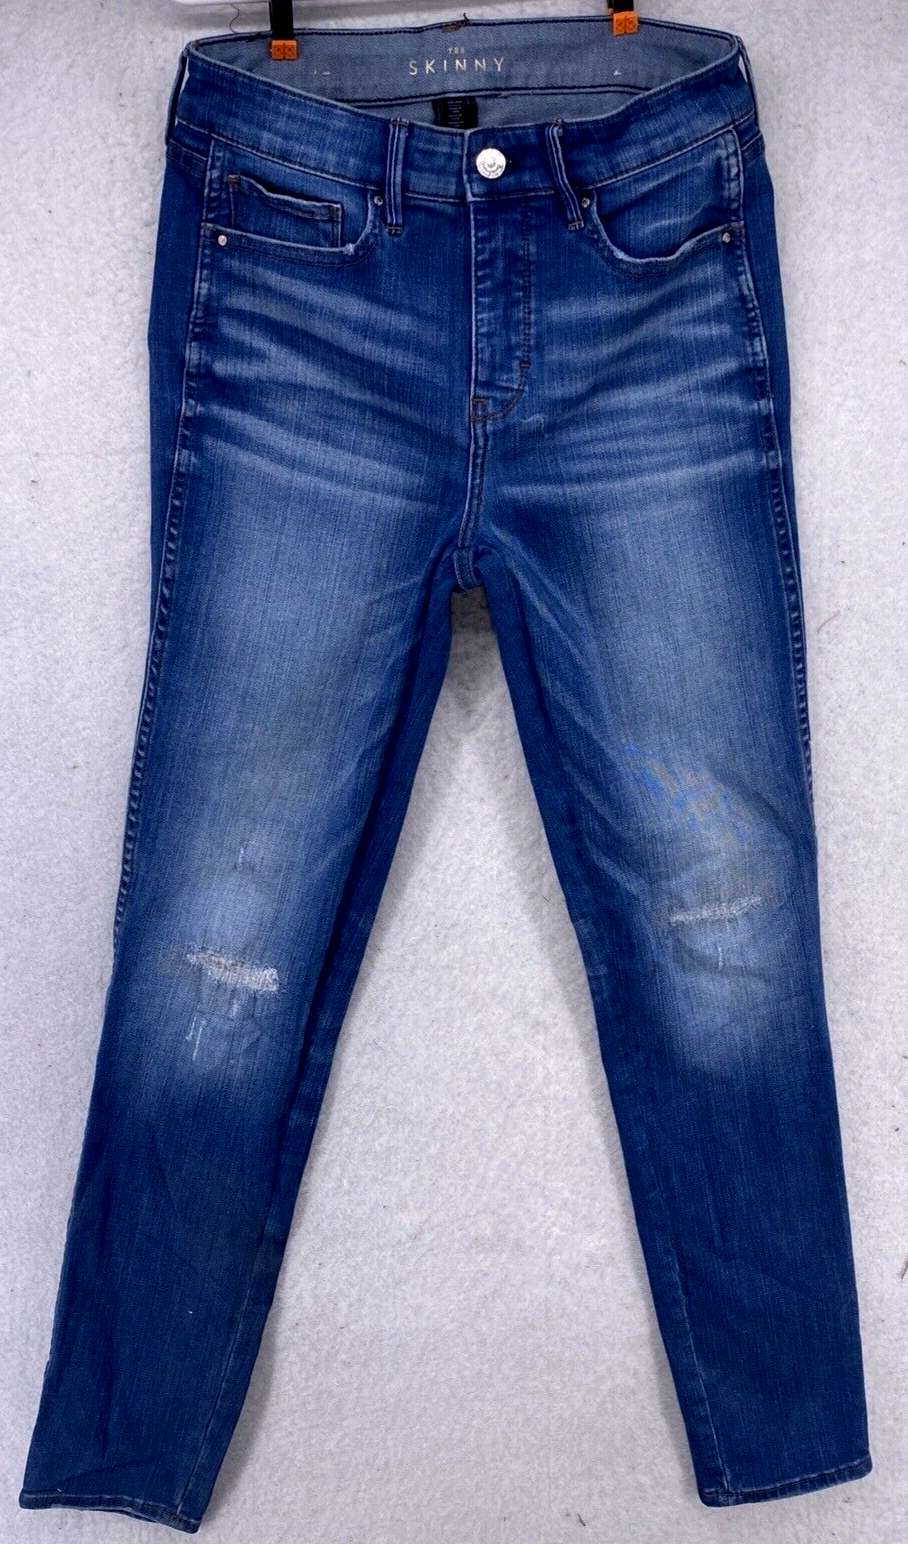 Primary image for White House Black Market Jeans Women's Size 4 Blue HI-Rise Fade Distressed Pants